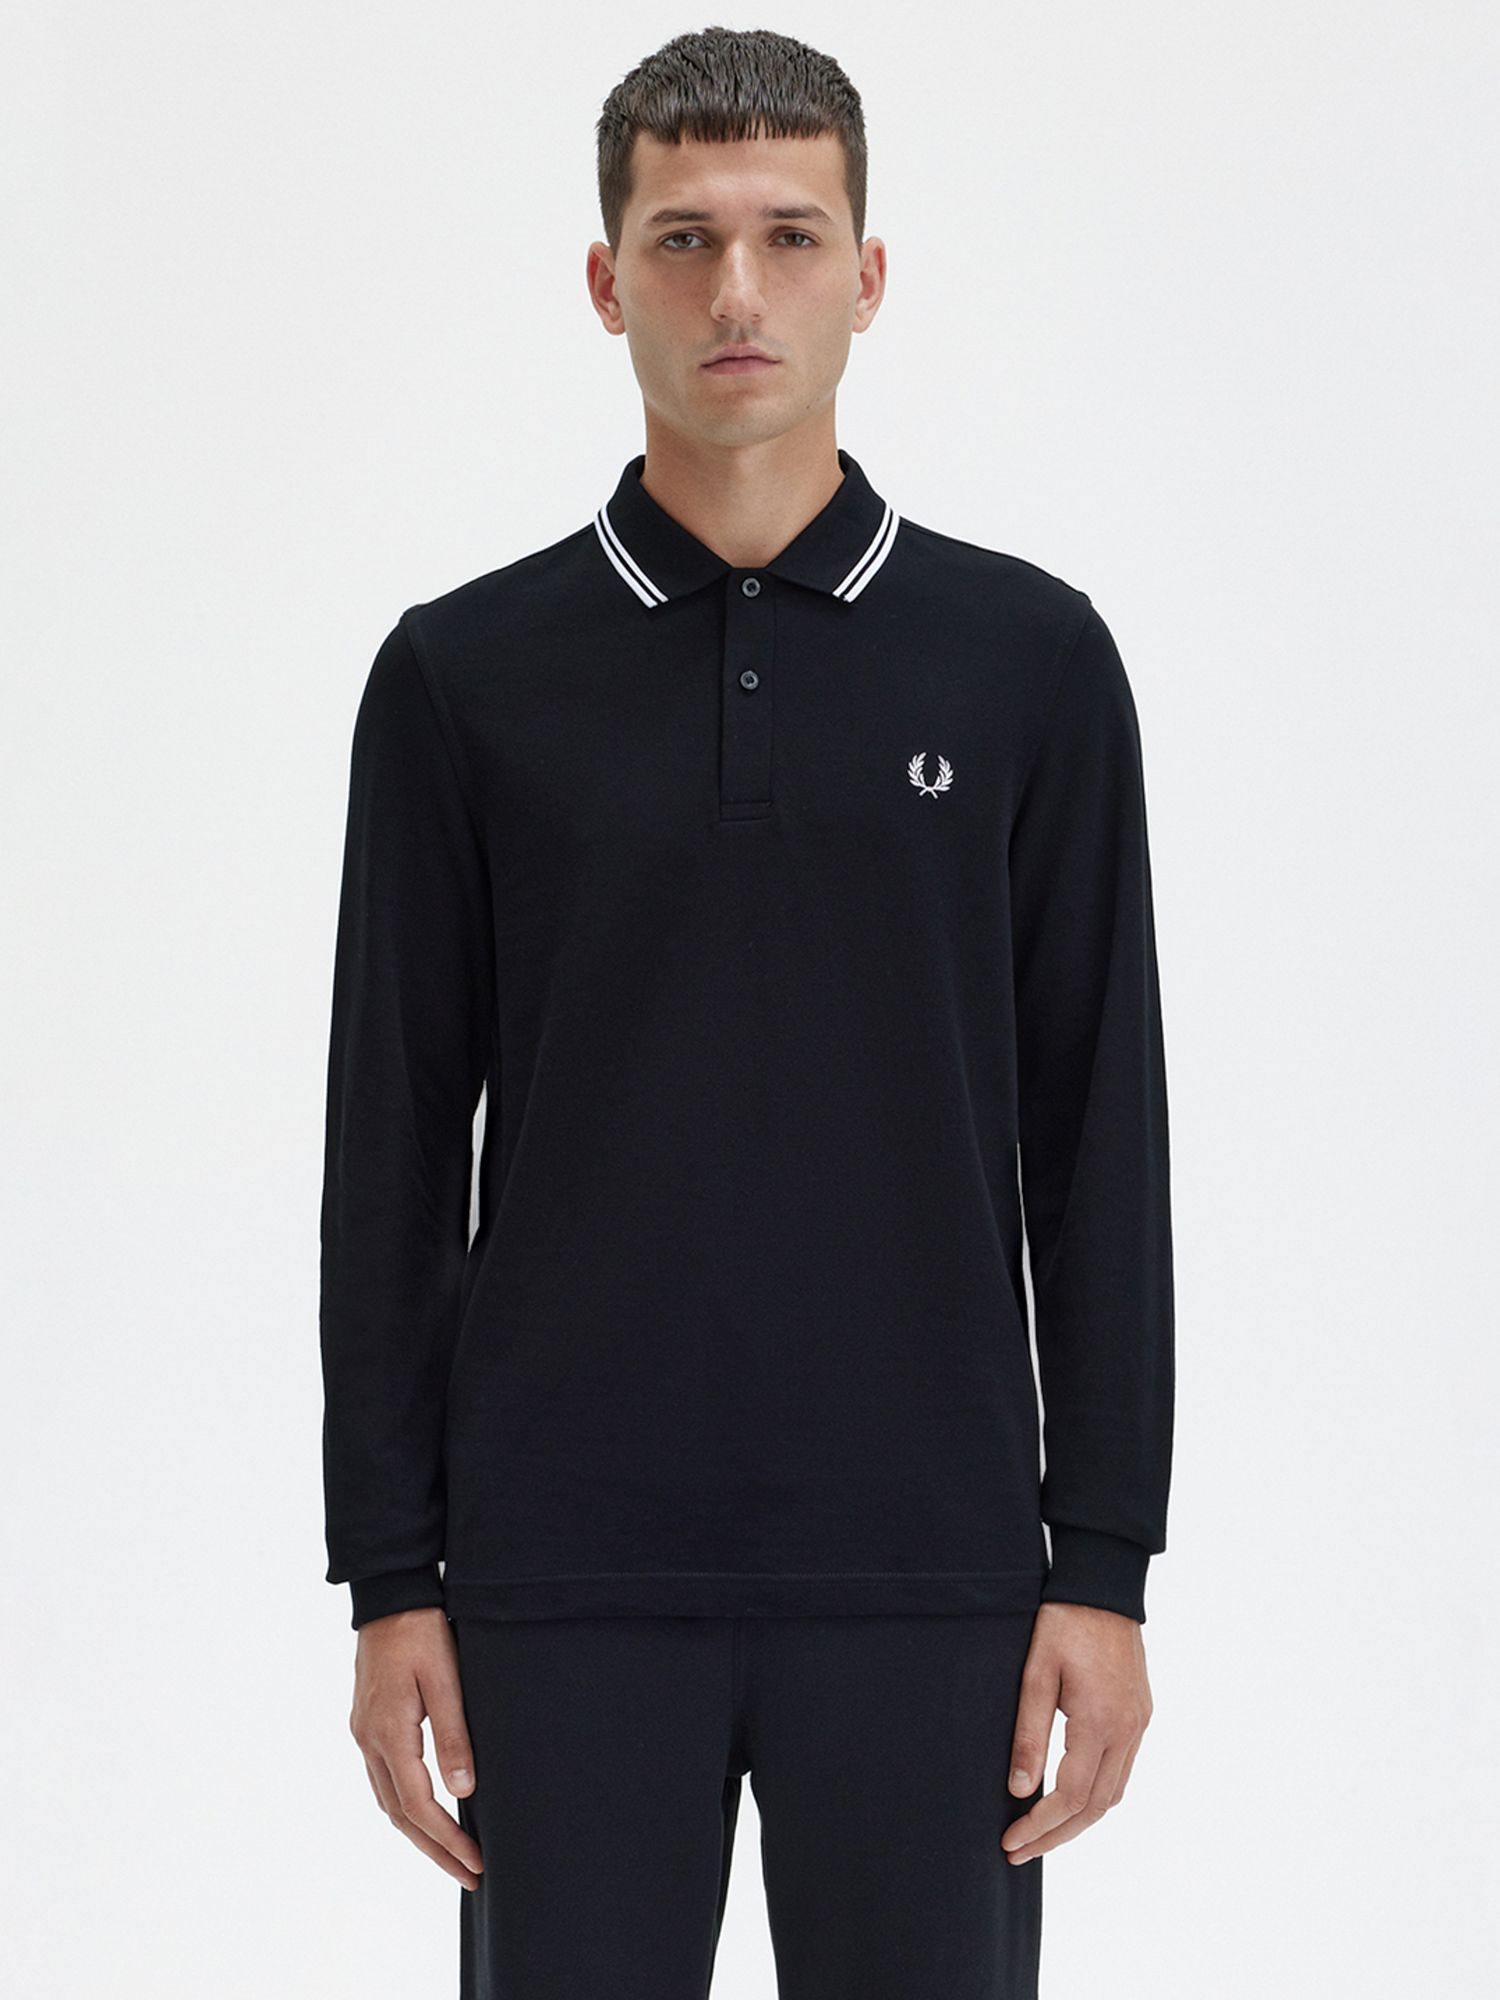 Fred Perry Twin Tipped Long Sleeve Polo Shirt, Black, M